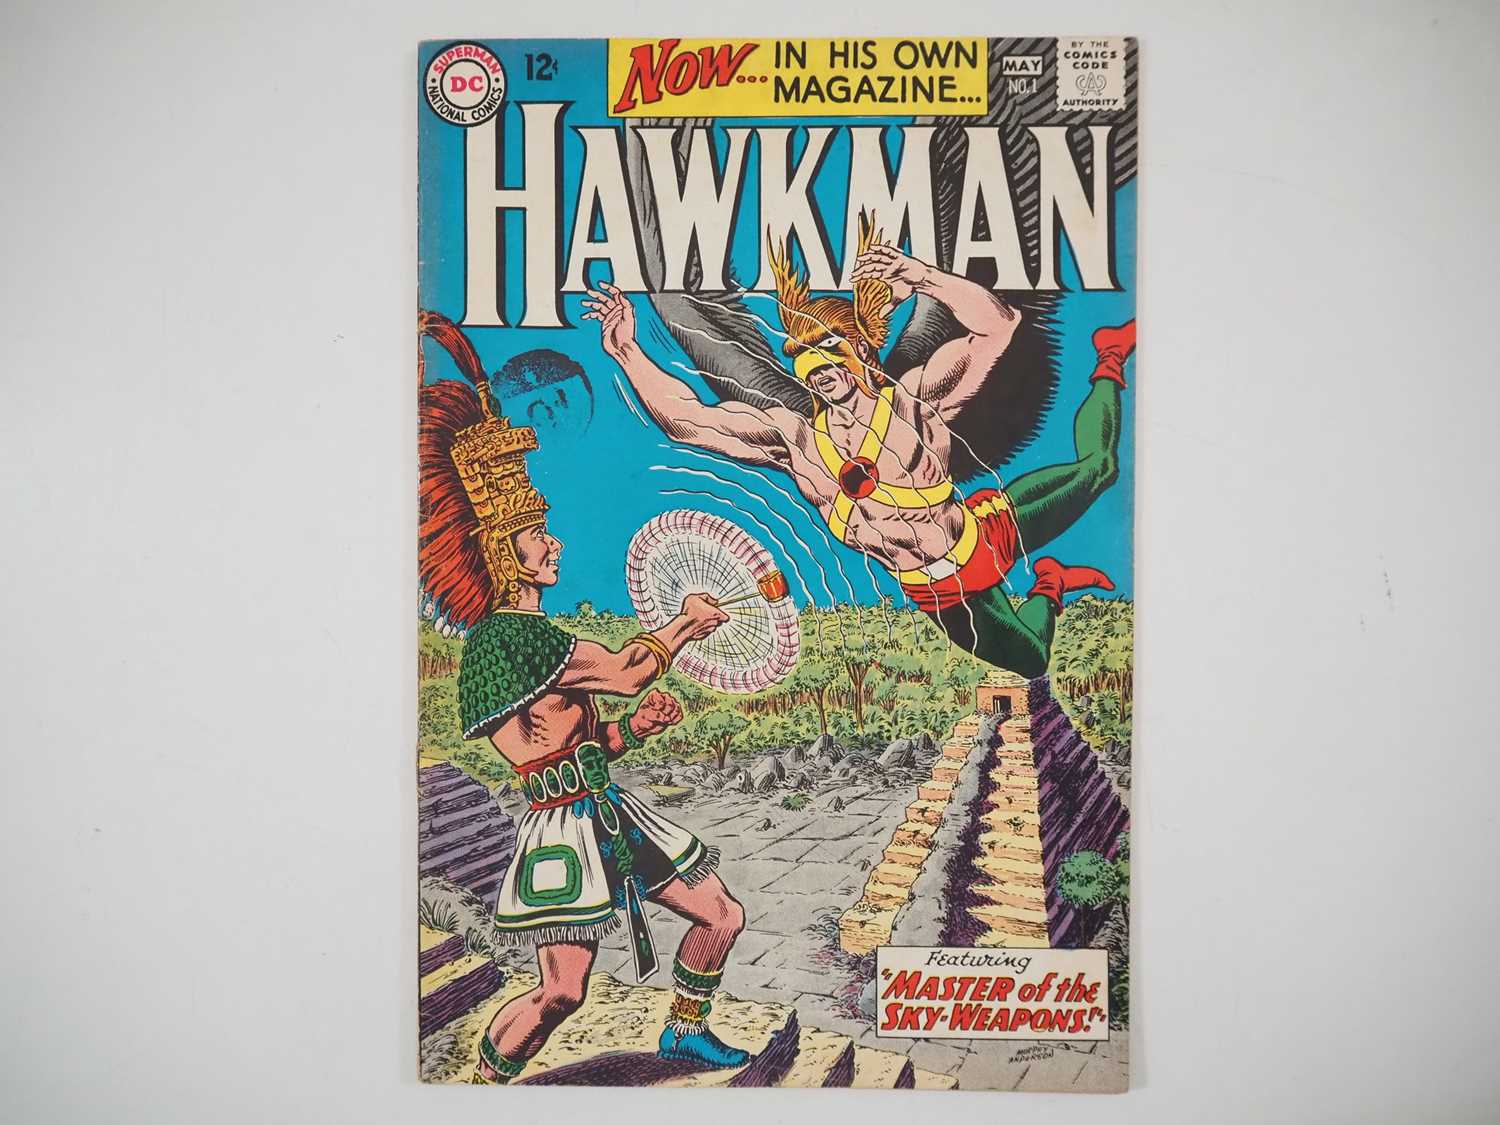 HAWKMAN #1 - (1964 - DC - UK Cover Price) - First solo title for Hawkman gets after appearances